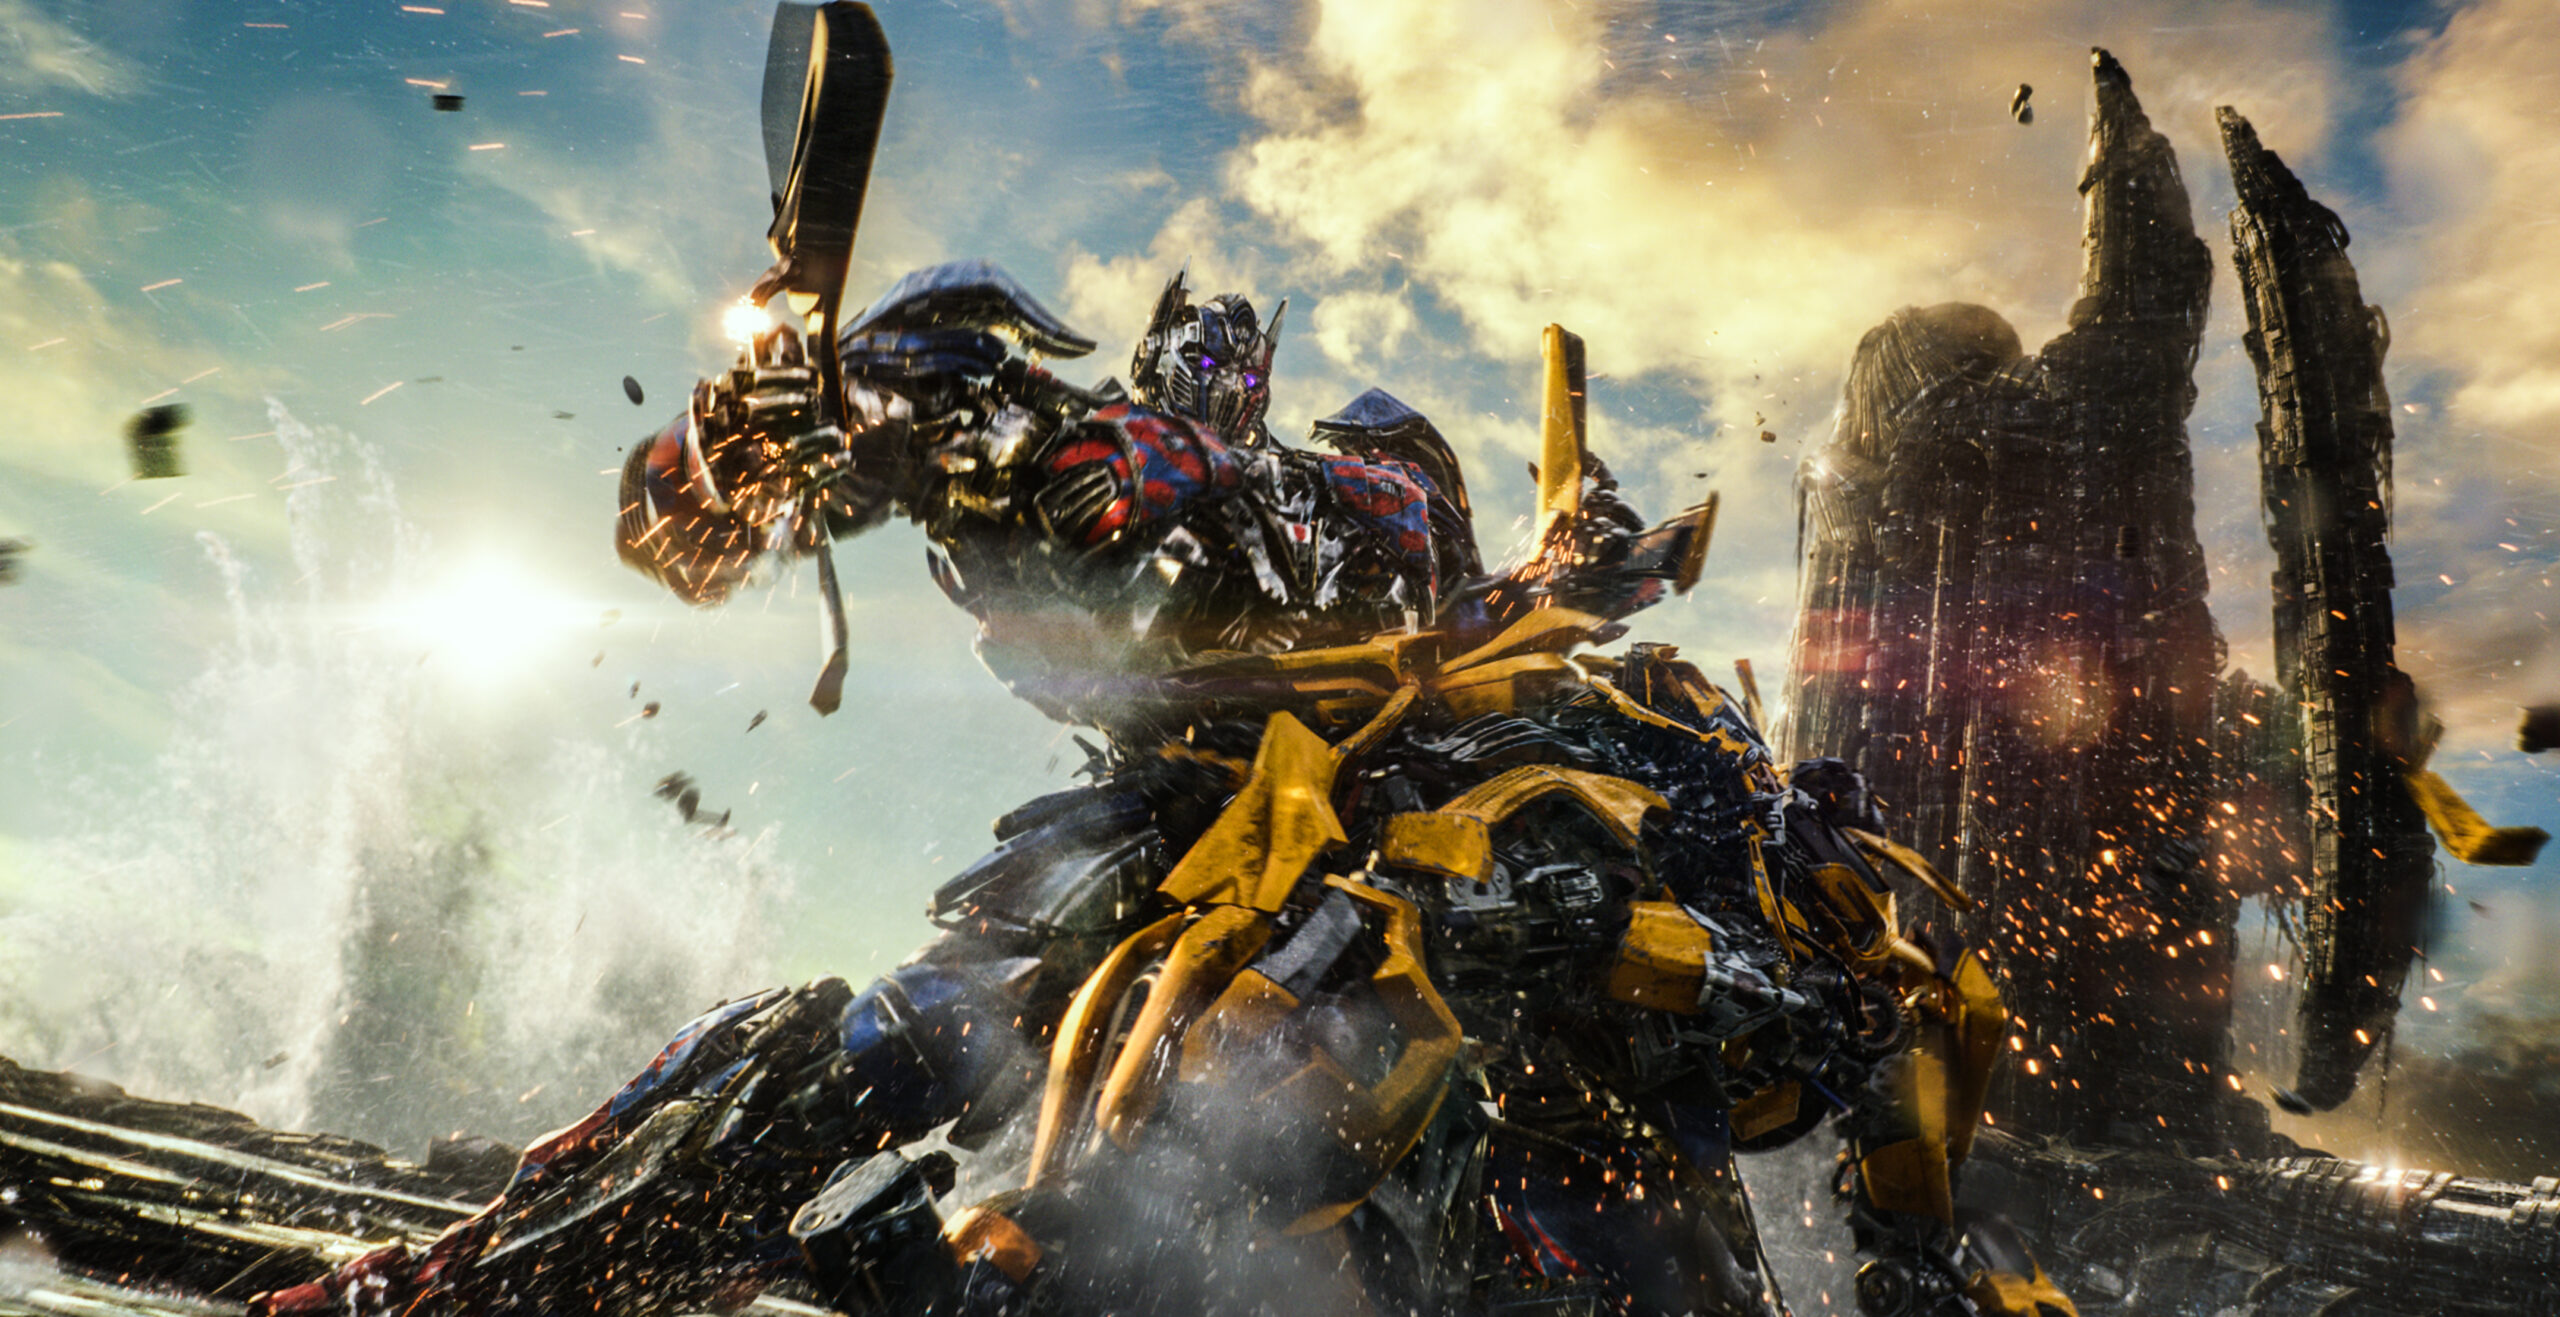 Transformers Ostatni Rycerz Transformers The Last Knight 04 POLSAT © 2017 Paramount Pictures. All Rights Reserved scaled